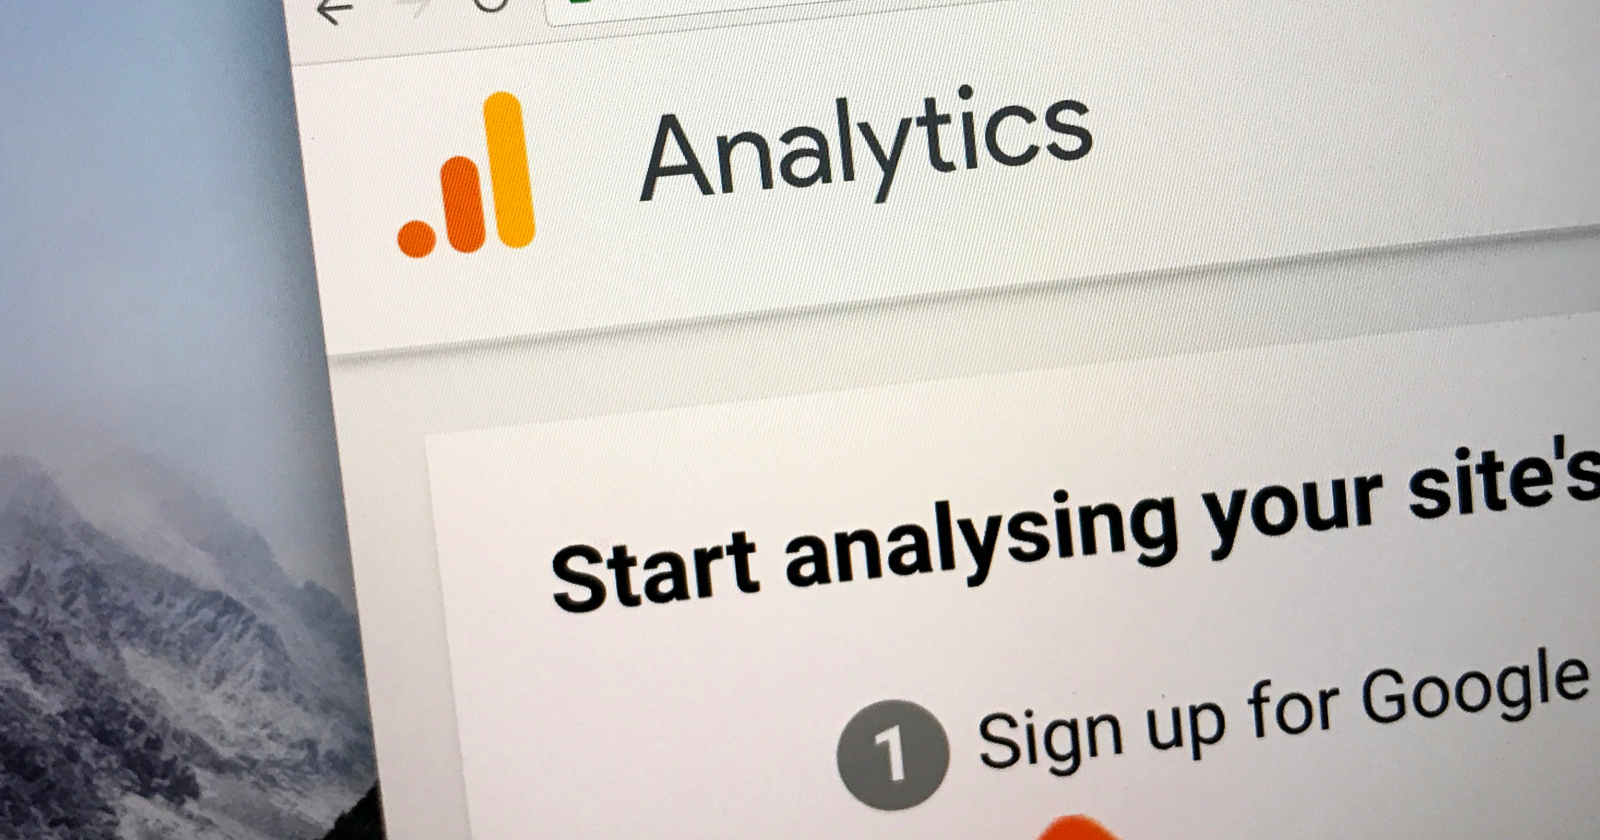 5 Things Google Analytics Can't Tell You & How to Get the Missing Info